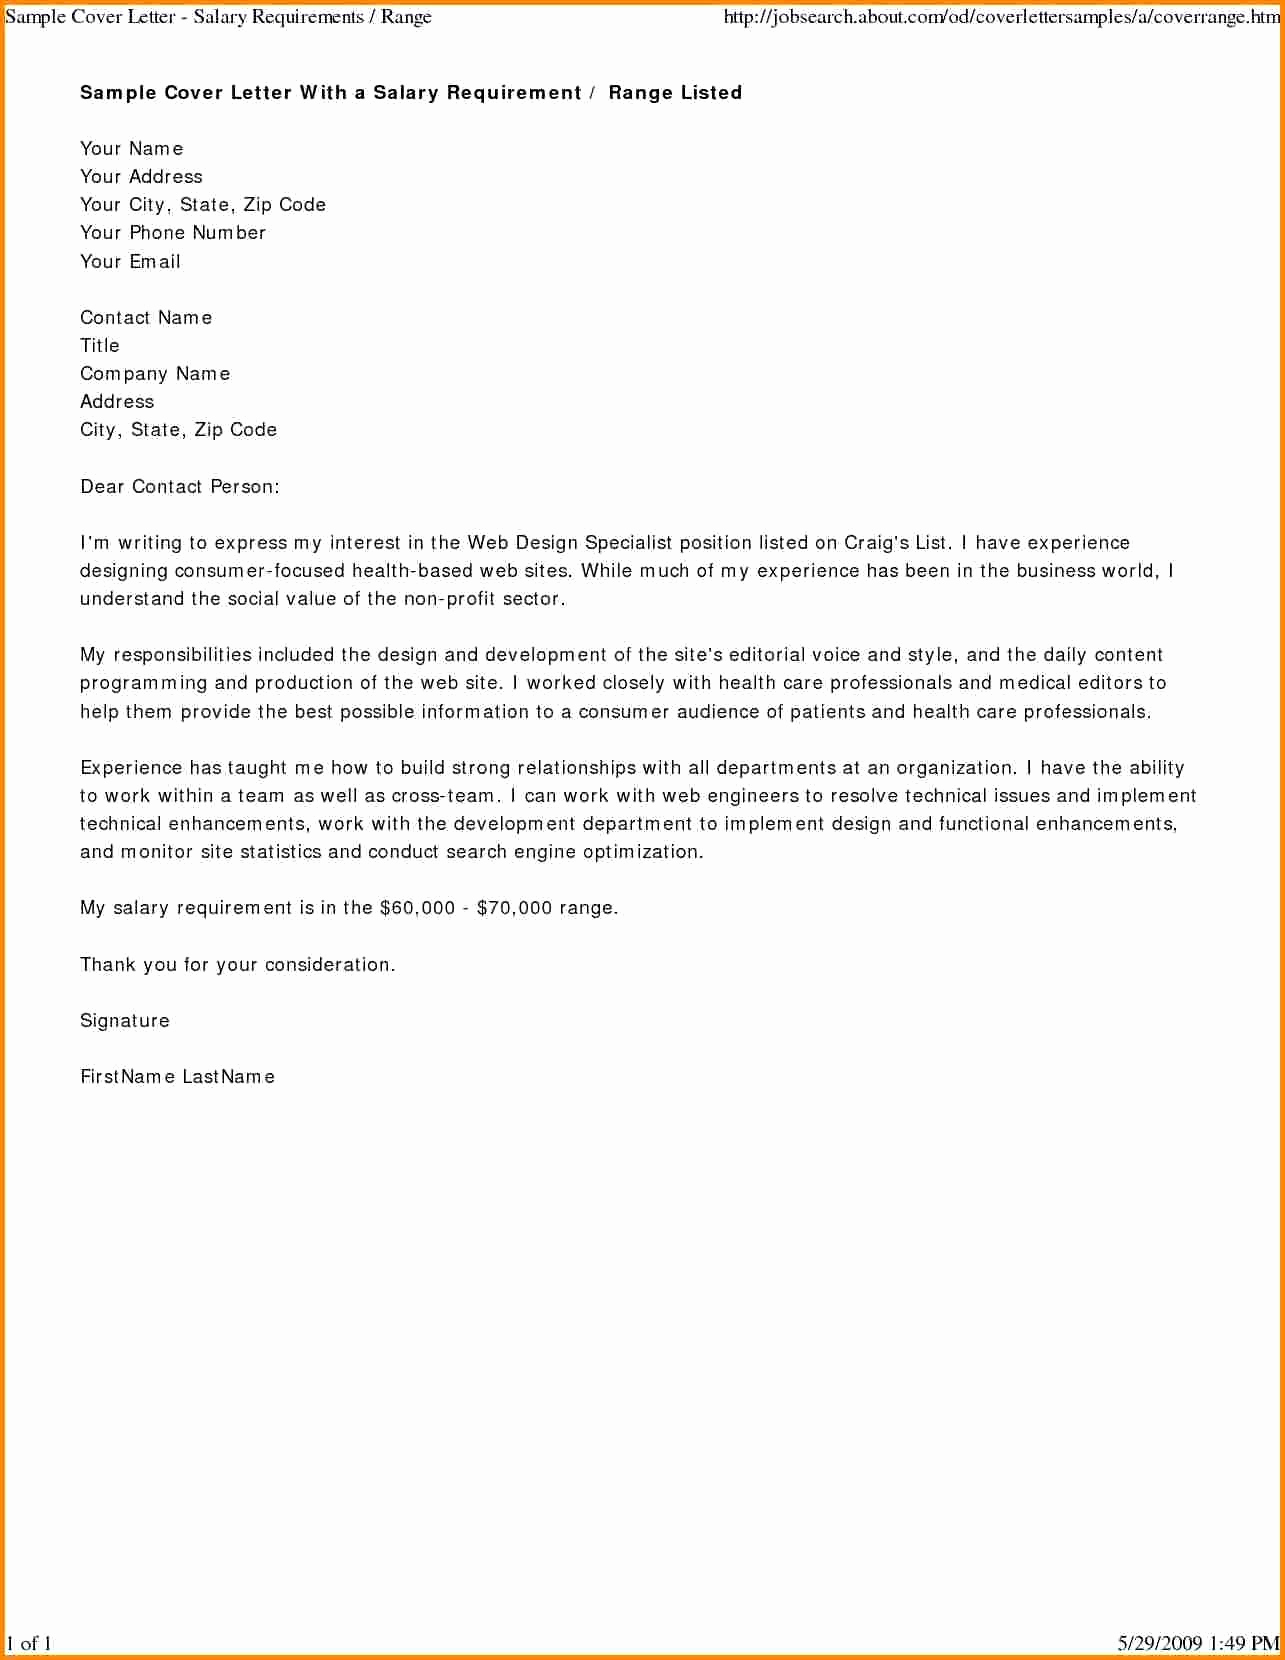 Increase Letter Template - Salary Increase Letter Template Elegant Basic Service Contract